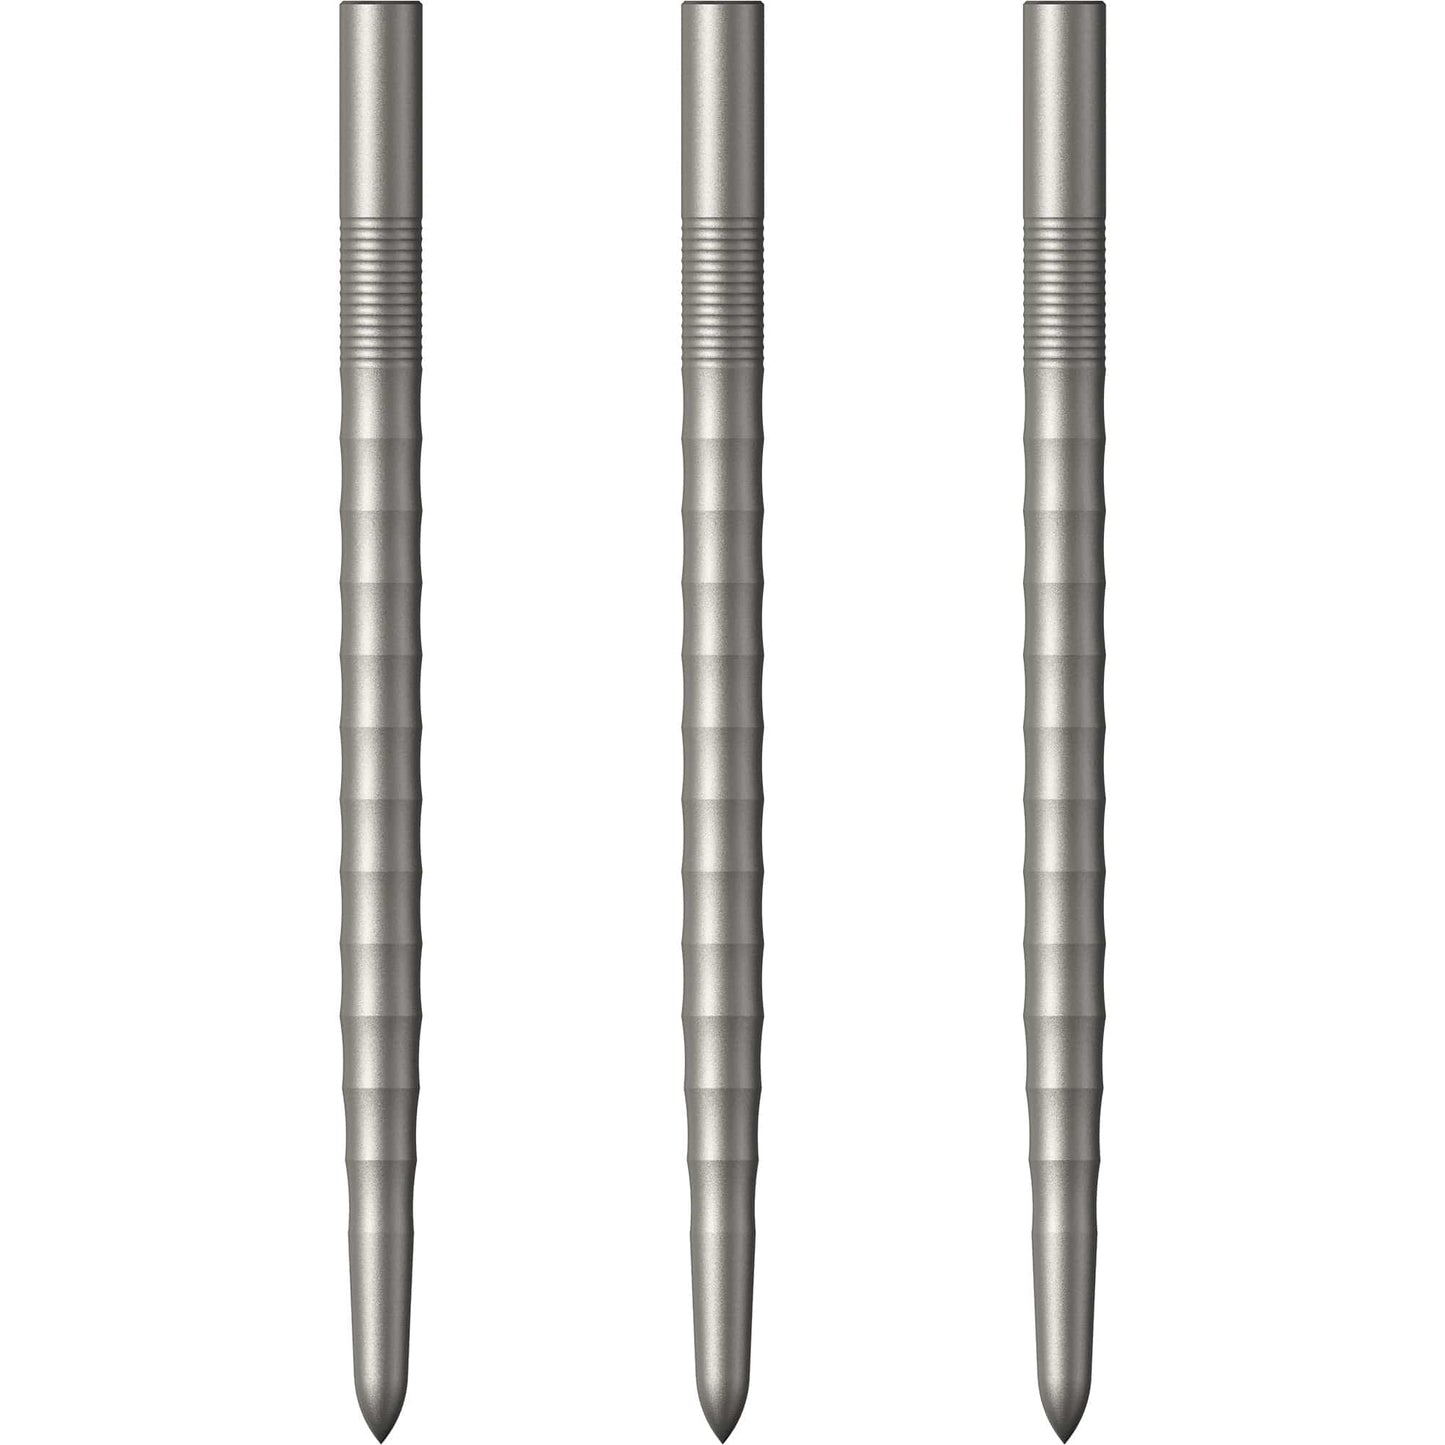 Mission Ripple Dart Points - Steel Tip Replacement Points - Silver 40mm